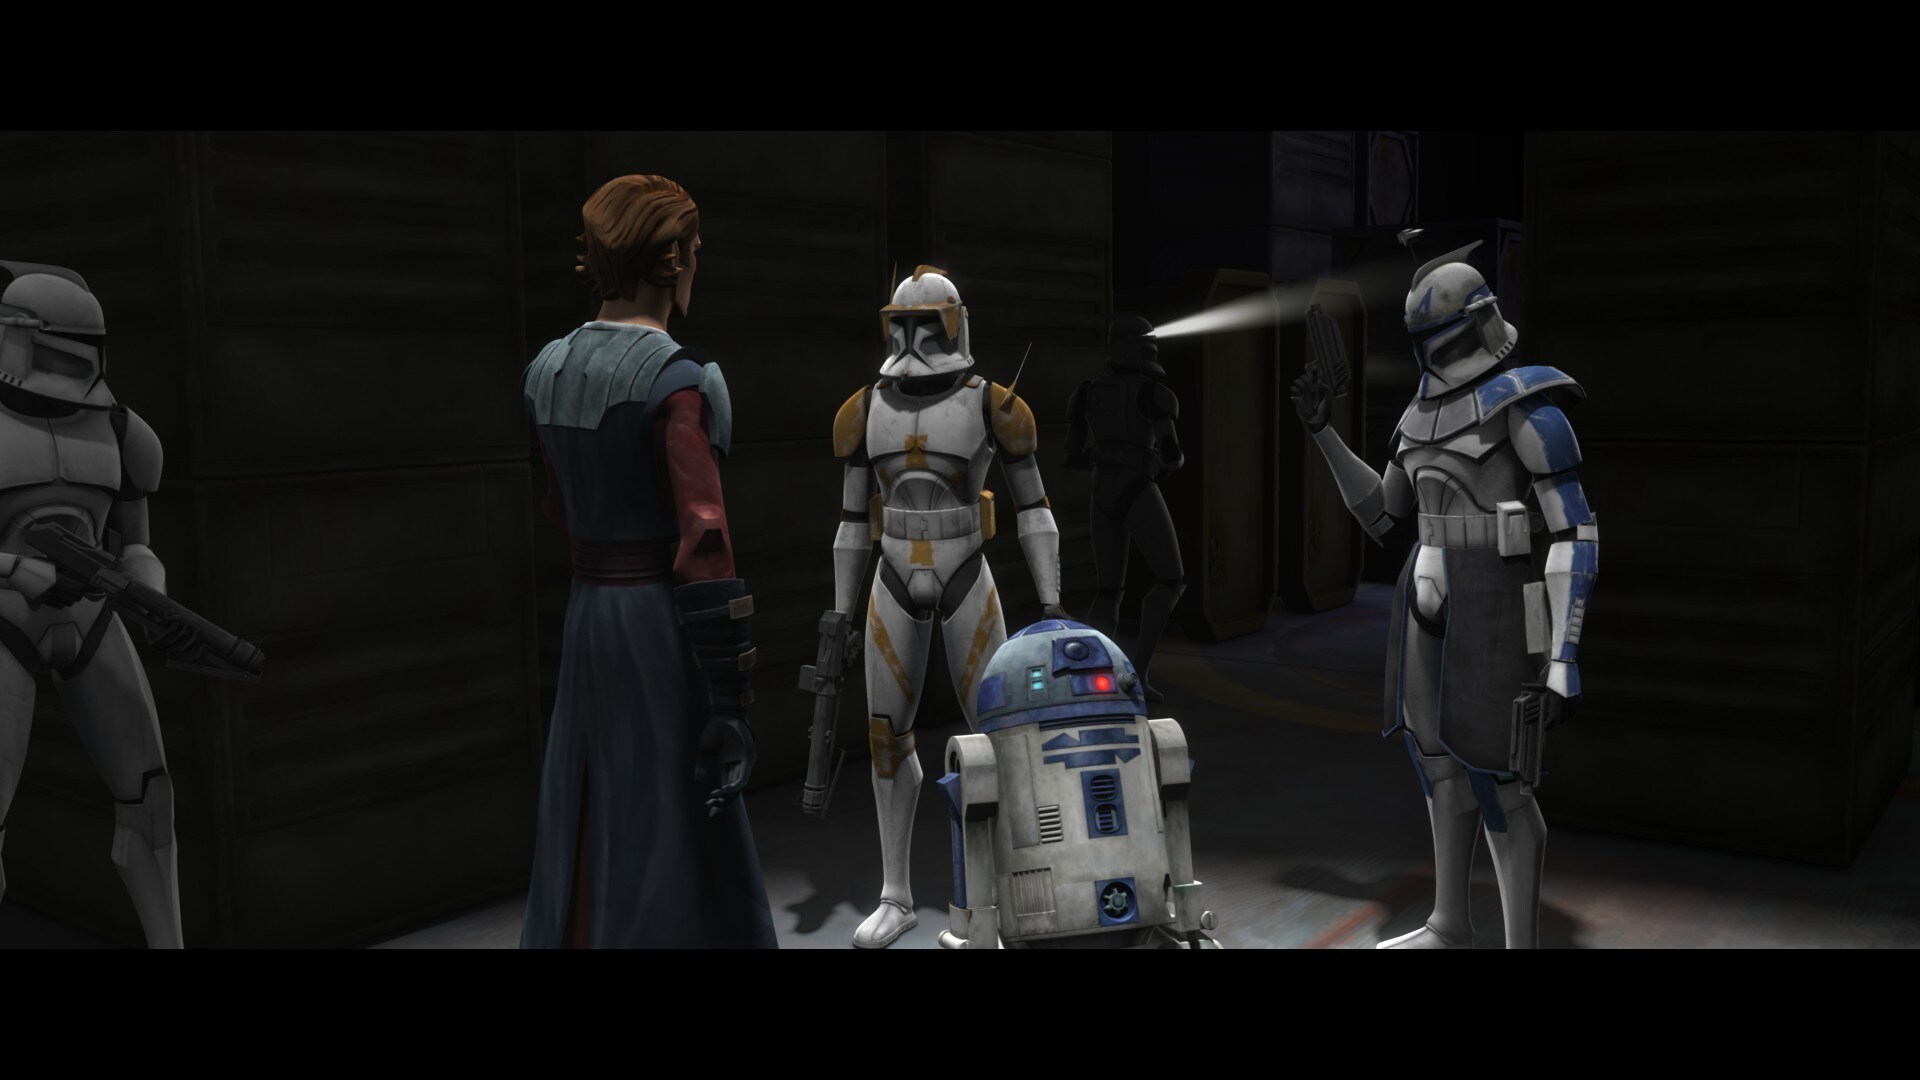 When Duchess Satine traveled from Mandalore to Coruscant, Cody was one of the leaders of the troo...